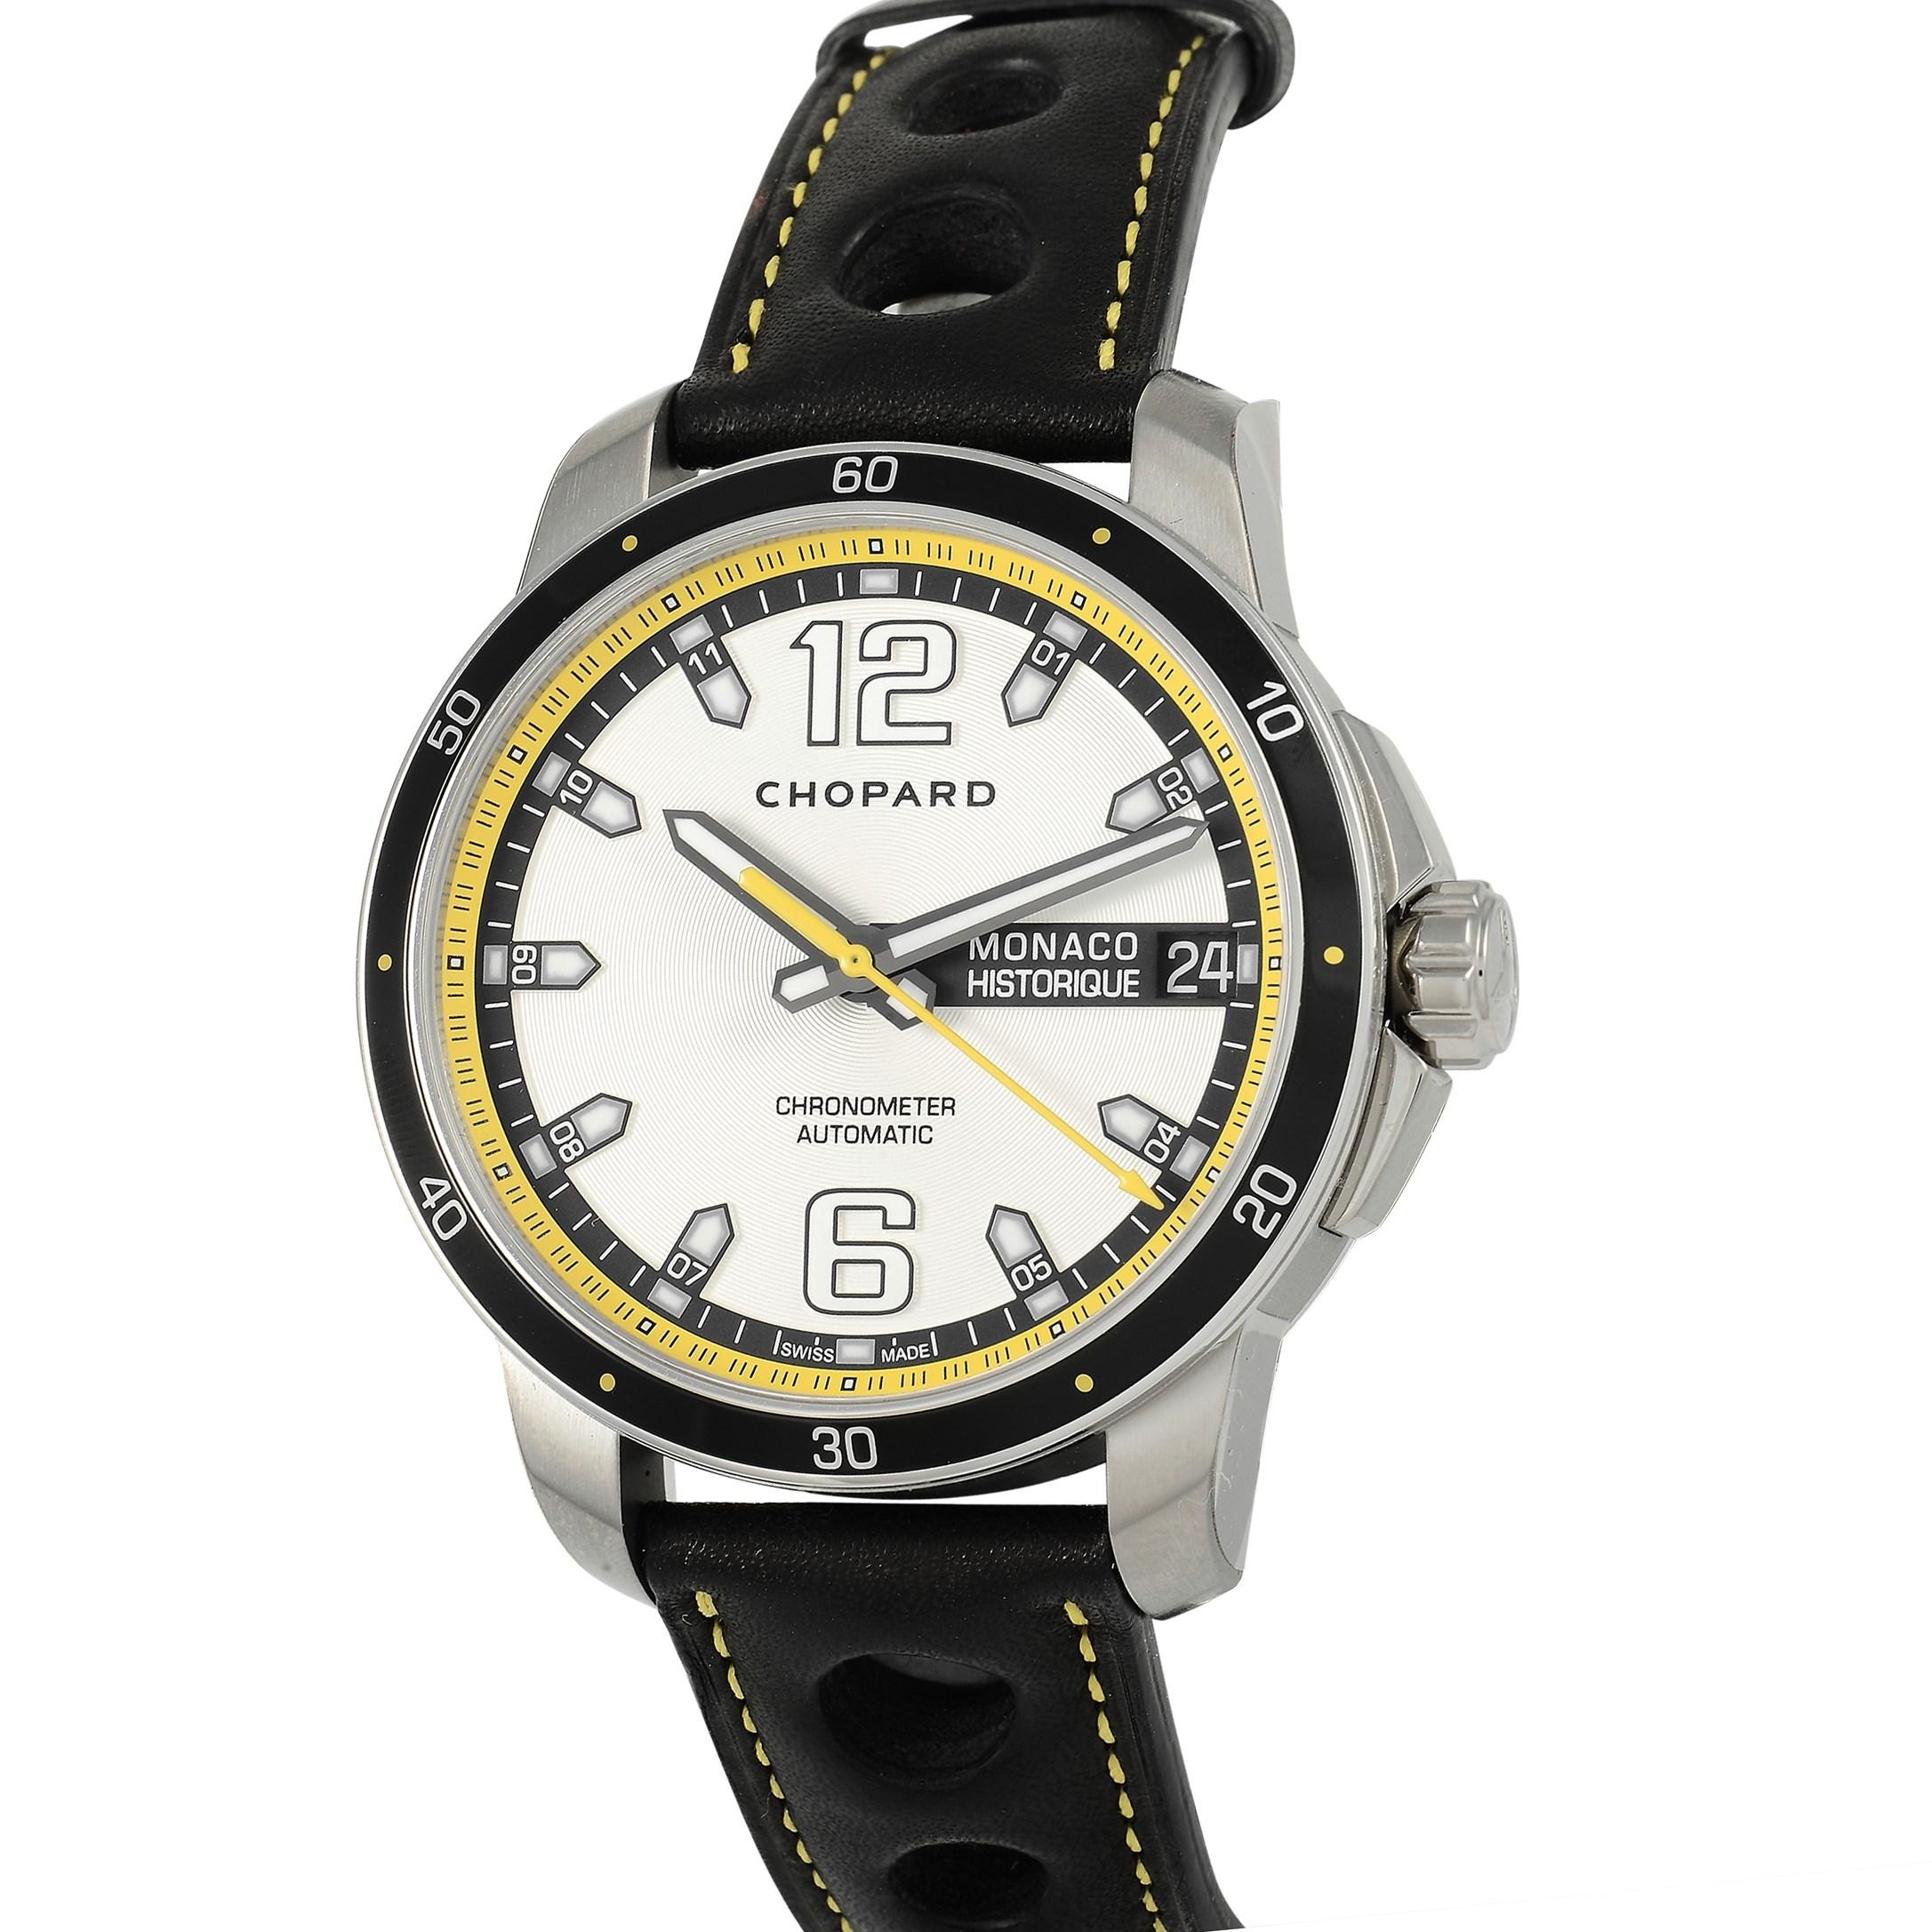 Renowned for their relentless passion towards the adventurous world of racing as well as their fascinating expertise in designing sporty models, Chopard created this remarkable timepiece which is a perfect tribute to the iconic Monaco Historique